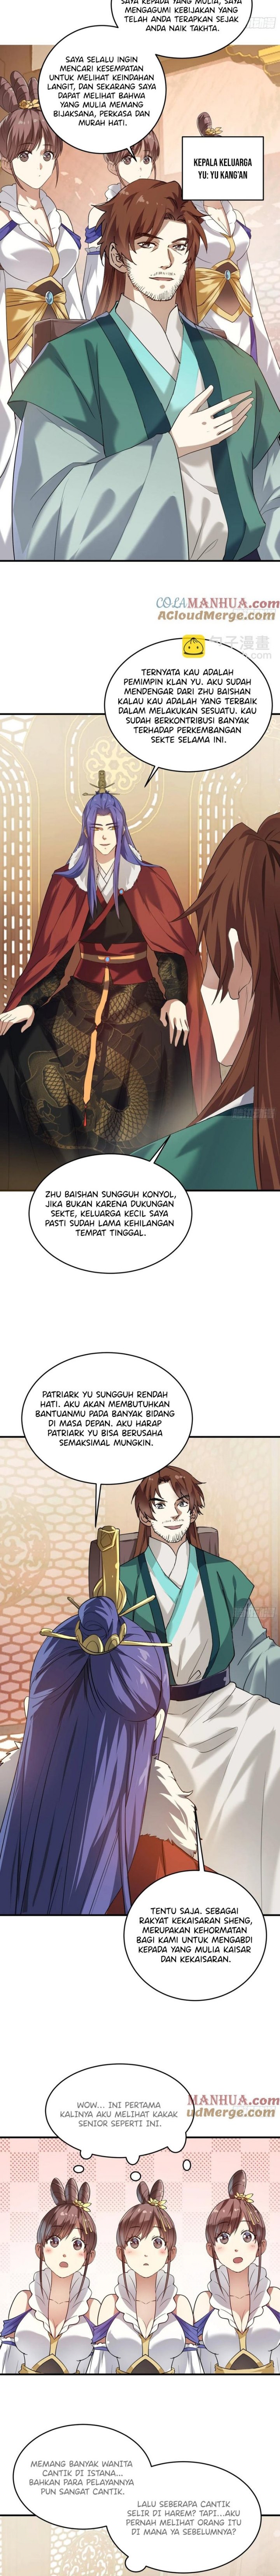 Dilarang COPAS - situs resmi www.mangacanblog.com - Komik i just dont play the card according to the routine 212 - chapter 212 213 Indonesia i just dont play the card according to the routine 212 - chapter 212 Terbaru 6|Baca Manga Komik Indonesia|Mangacan